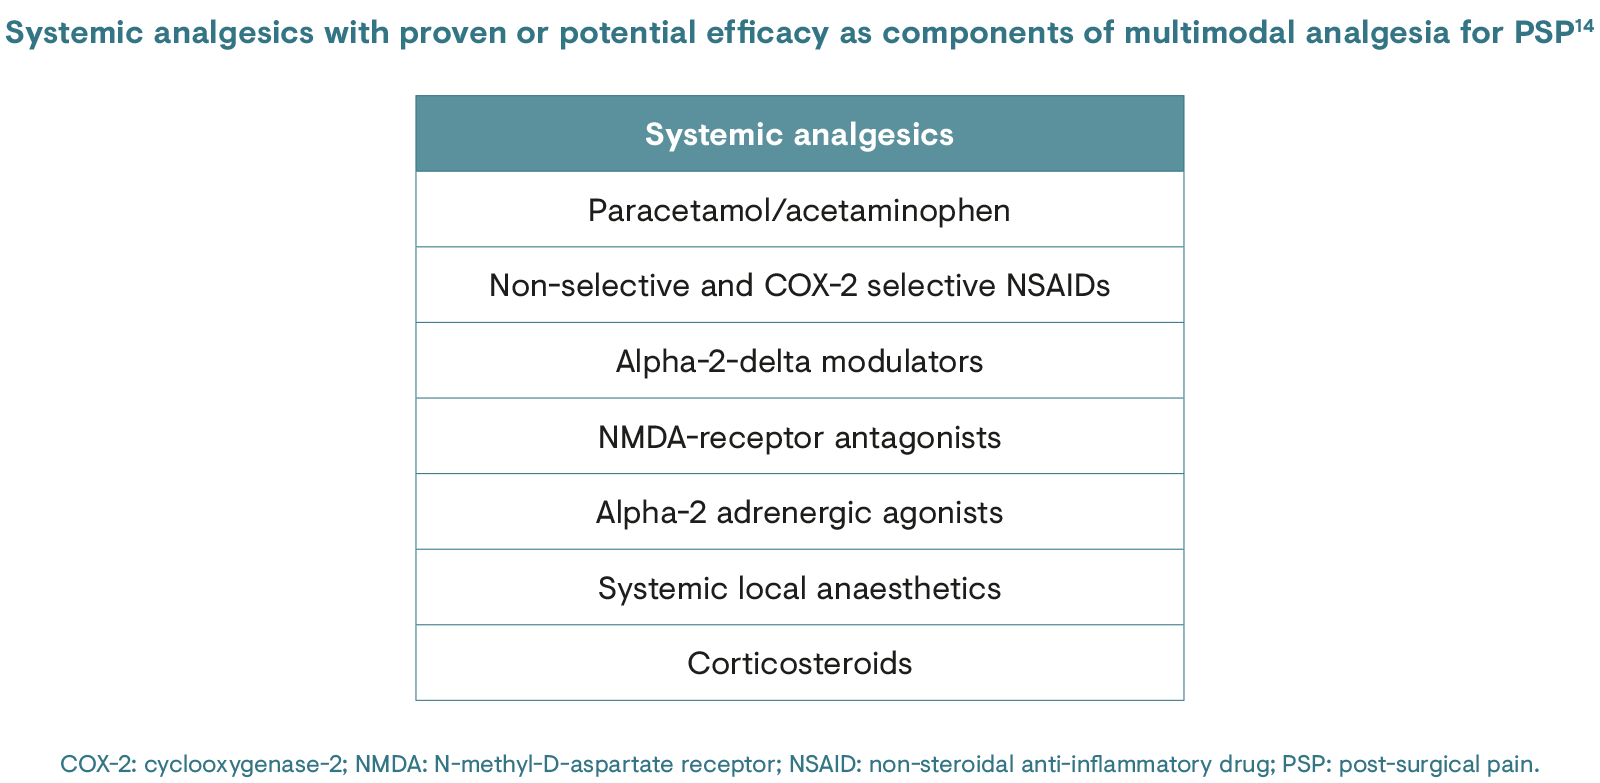 Systemic analgesics with proven or potential efficacy as components of multimodal analgesia for post surgical pain